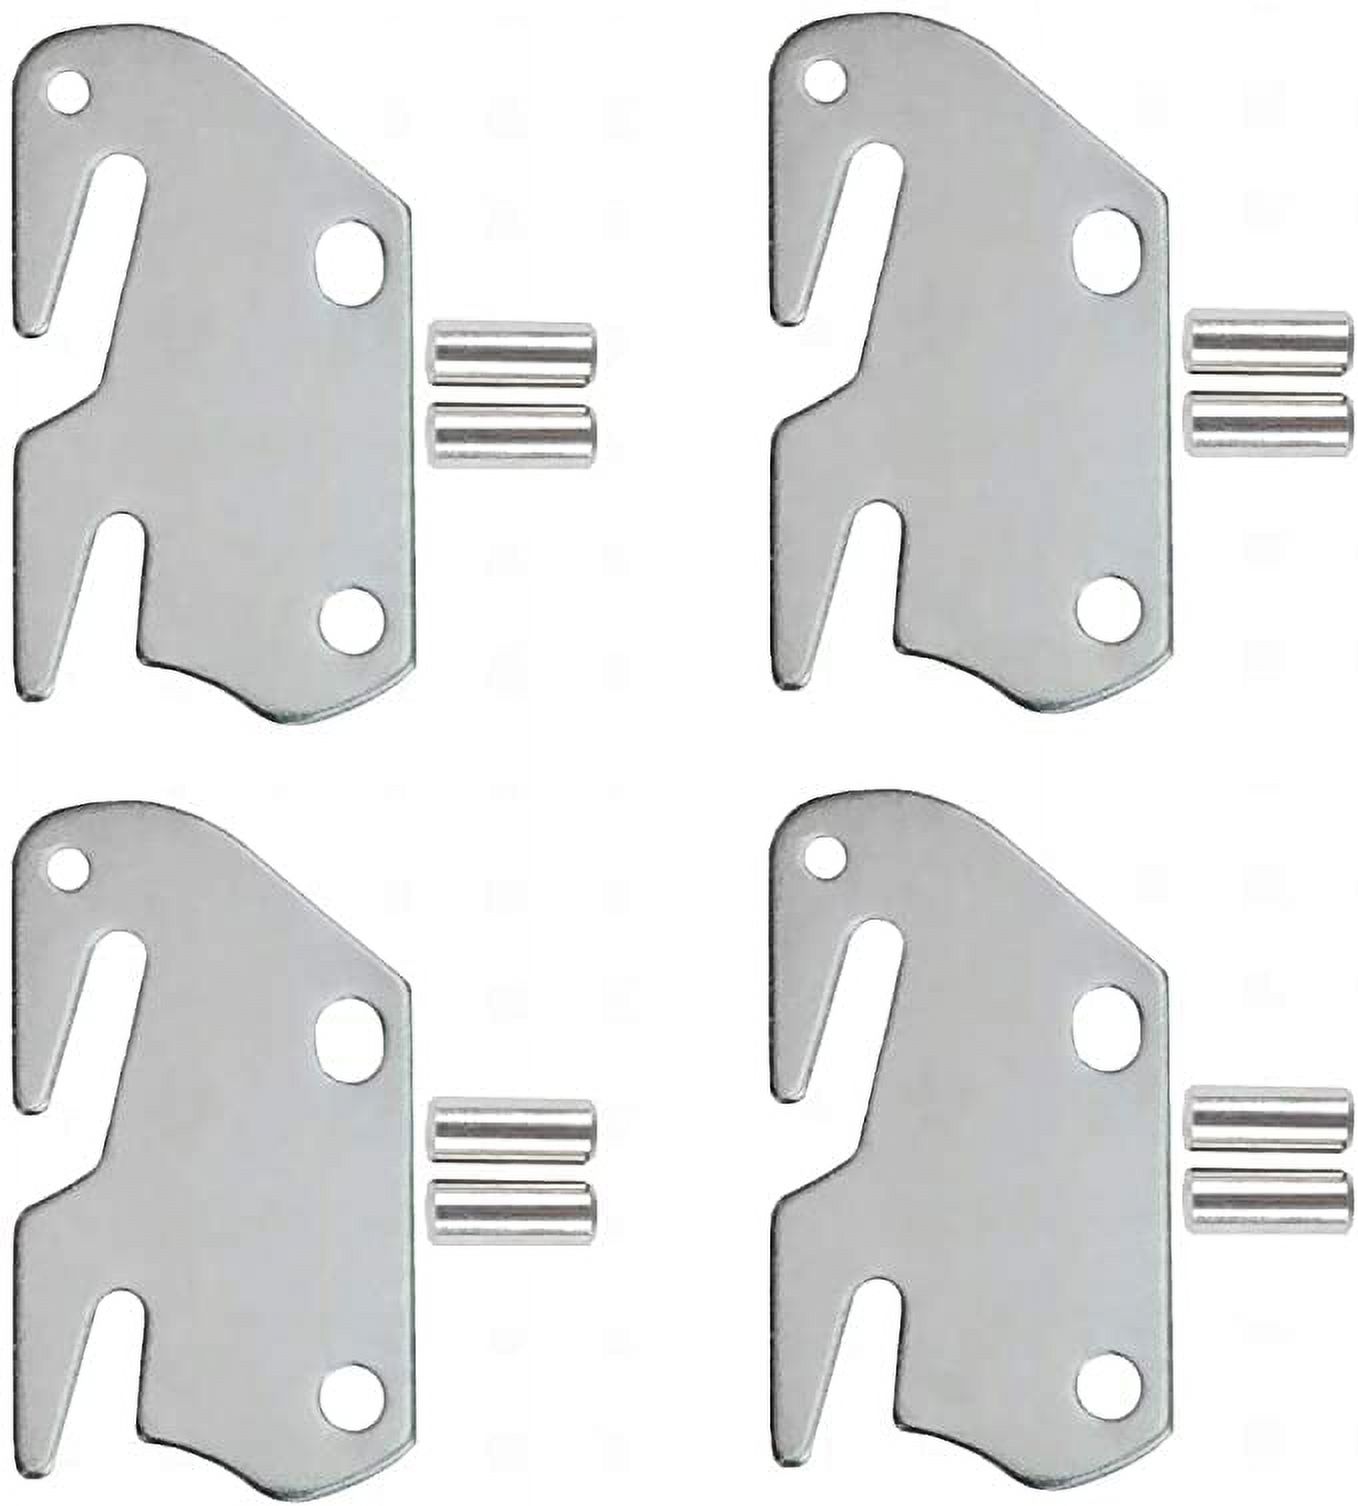 SDTC Tech 4 Sets Wooden Bed Rail Hook Plates #10 Bed Frame Bracket Headboard Footboard Hook Supports with Mounting Pins for Bed Parts Replacement or New Bed Constructions - image 1 of 1